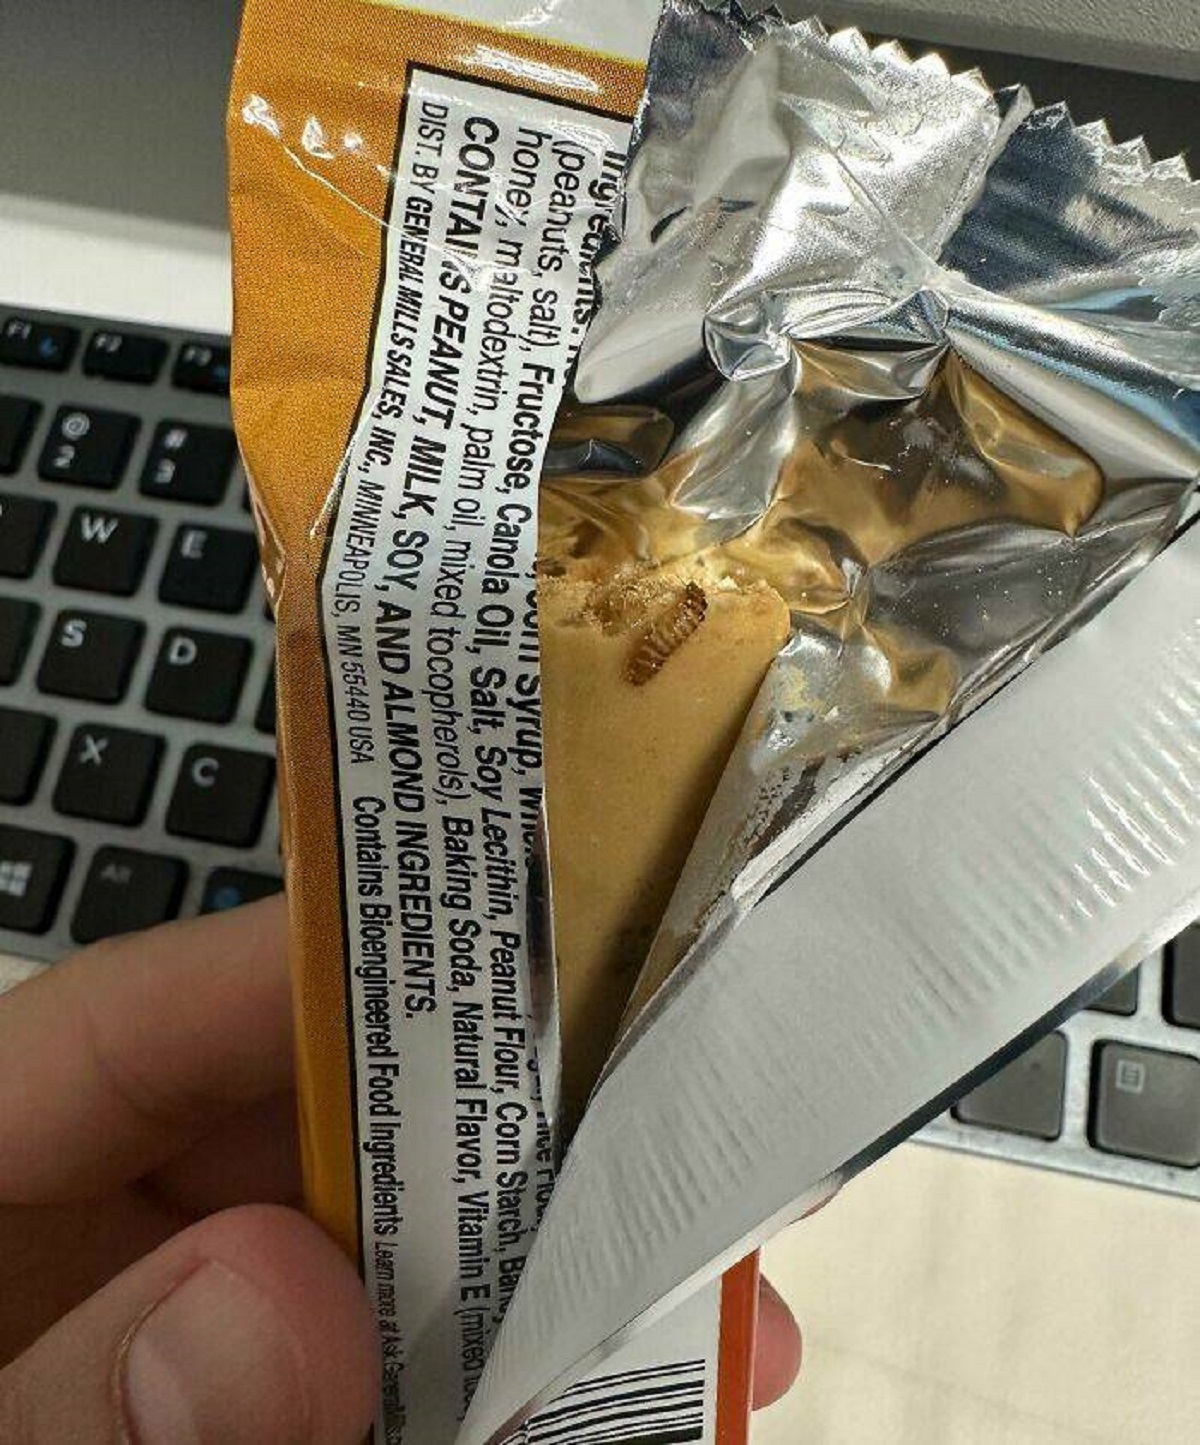 "I Have A Costco Box Full Of These At Work, Just Ate One Yesterday. This Entire Bar Was Infested With These… Things"